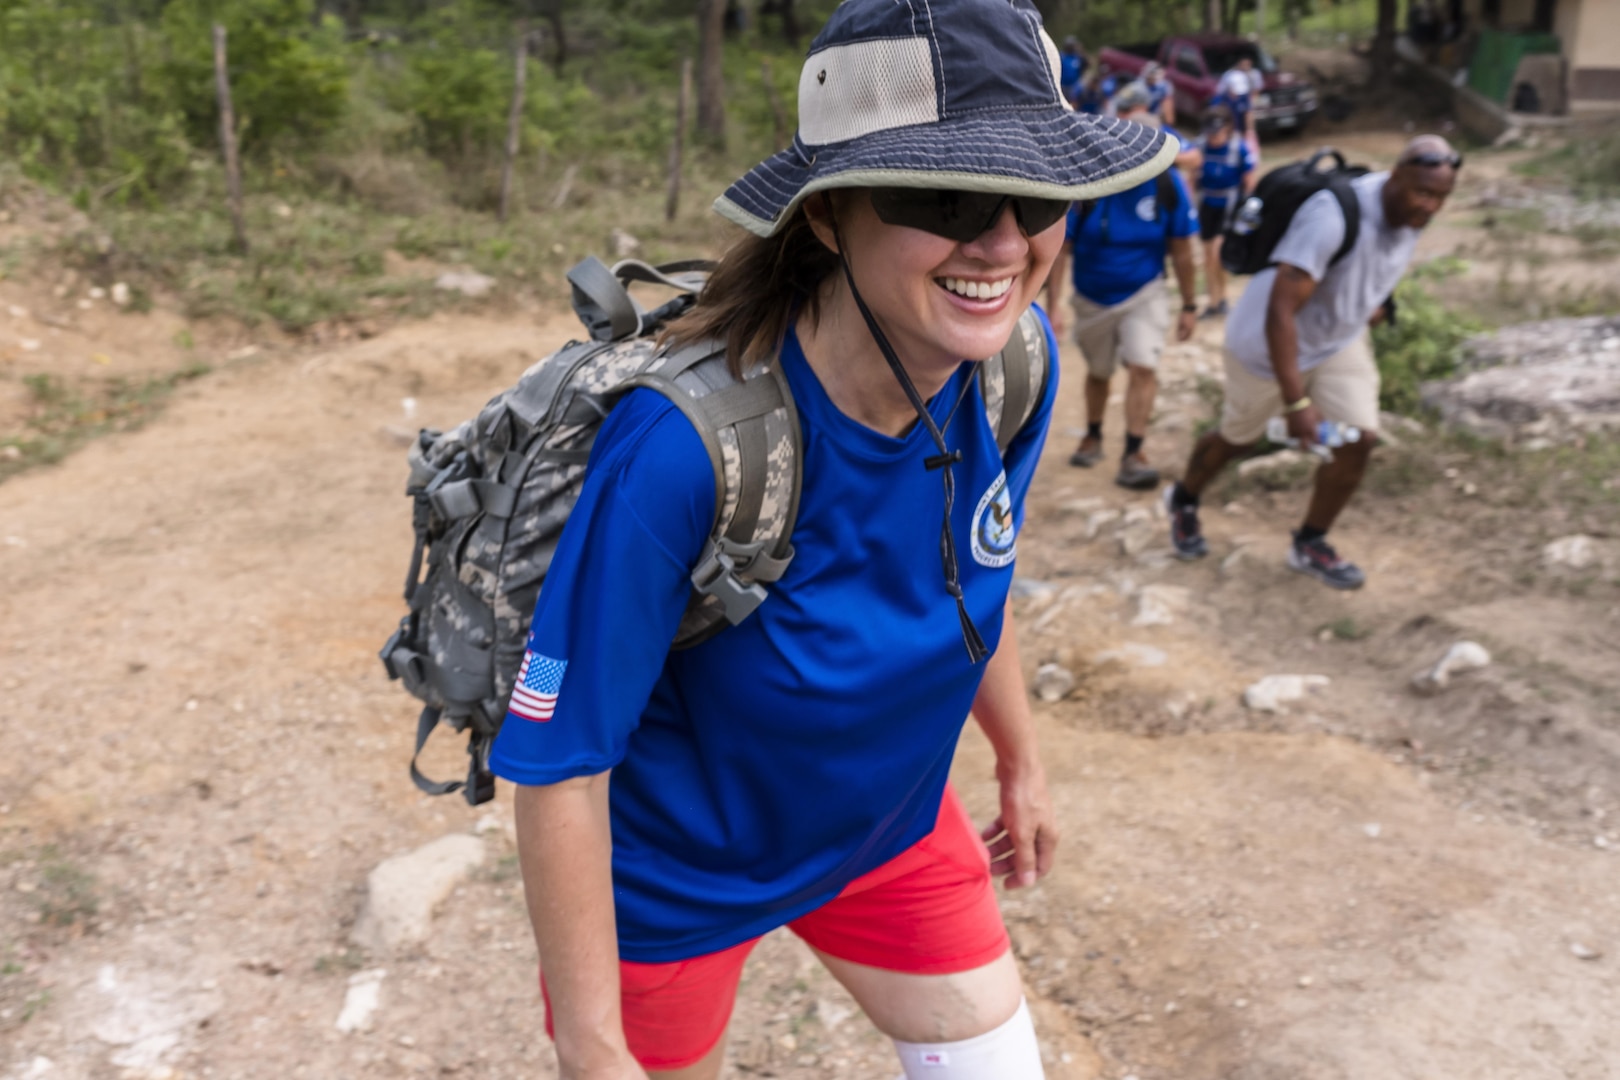 U.S. Army Lt. Col. Rhonda Dyer, Joint Task Force-Bravo Medical Element, hiked approximately 3.6 miles round-trip carrying 25 lbs of food to the village of San Jerónimo, Comayagua, Honduras, Apr. 29, 2017. Members of JTF-Bravo carried more than 5025 lbs of food and supplies, 24 soccer balls and 3 piñatas to the people of San Jerónimo. Chapel hikes have been occurring since 2003, with the JTF-Bravo Chapel sponsoring an average of six every year. The hikes are designed to provide a practical way for JTF-Bravo members to engage and partner with local communities to provide support to surrounding villages in need of food and supplies. (U.S. Air National Guard photo by Master Sgt. Scott Thompson/released)